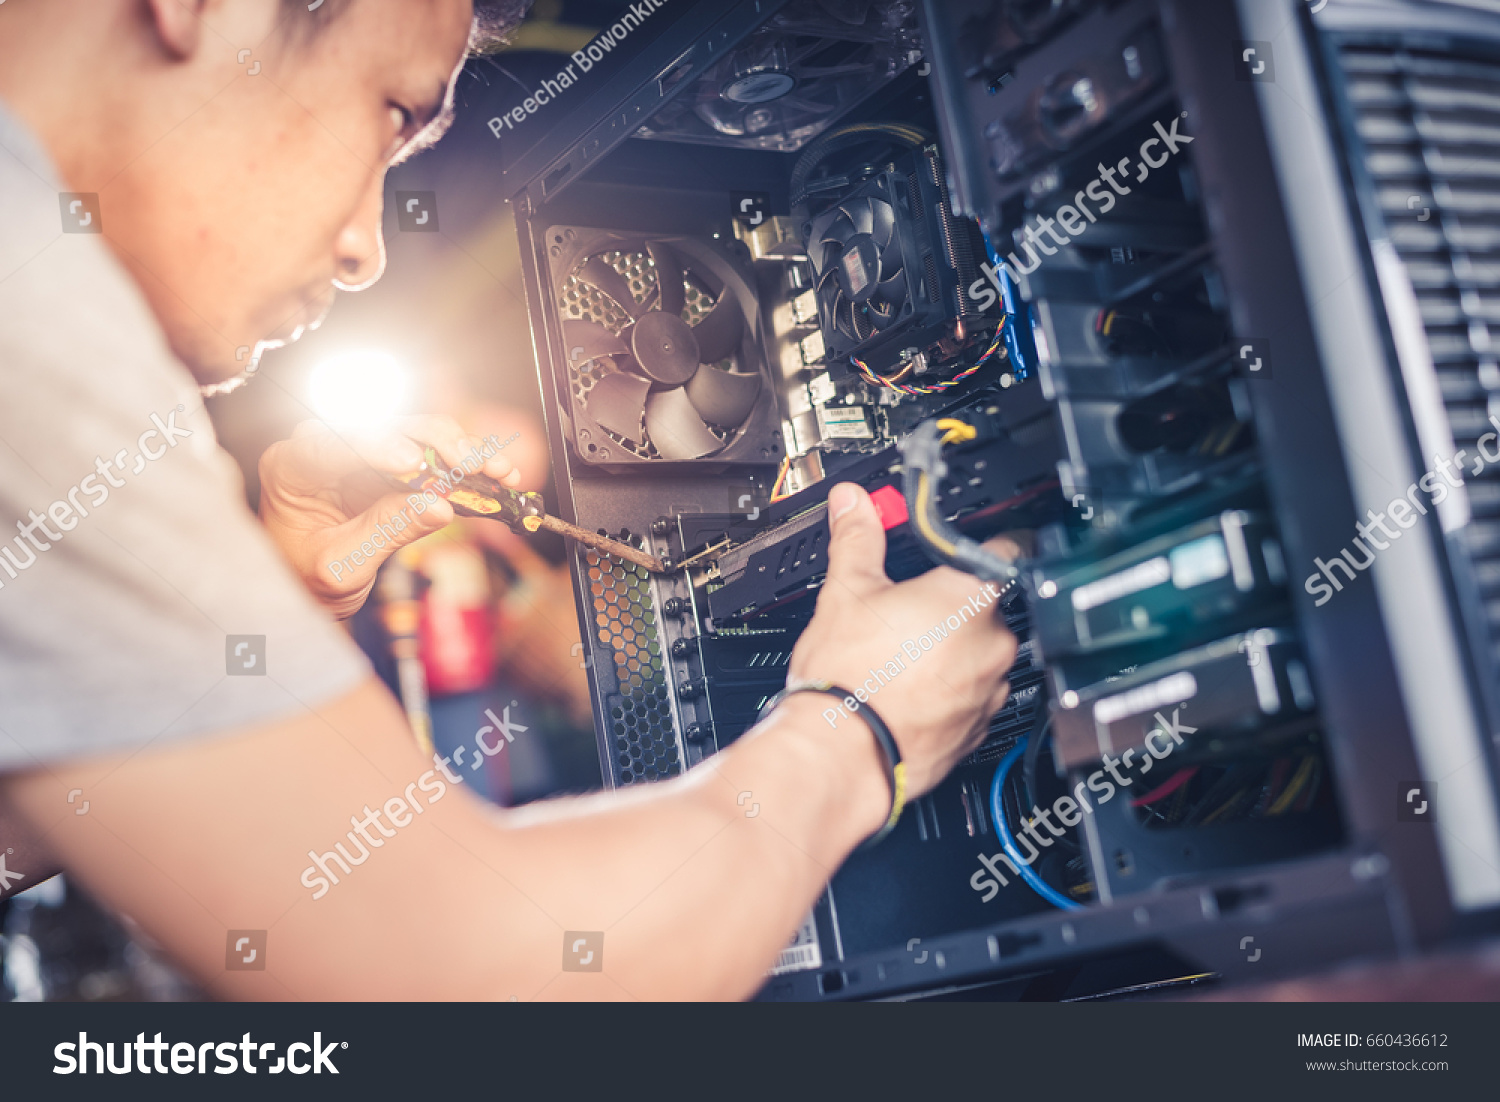 The technician hold the screwdriver for repairing the computer. the concept of computer hardware, repairing, upgrade and technology. #660436612